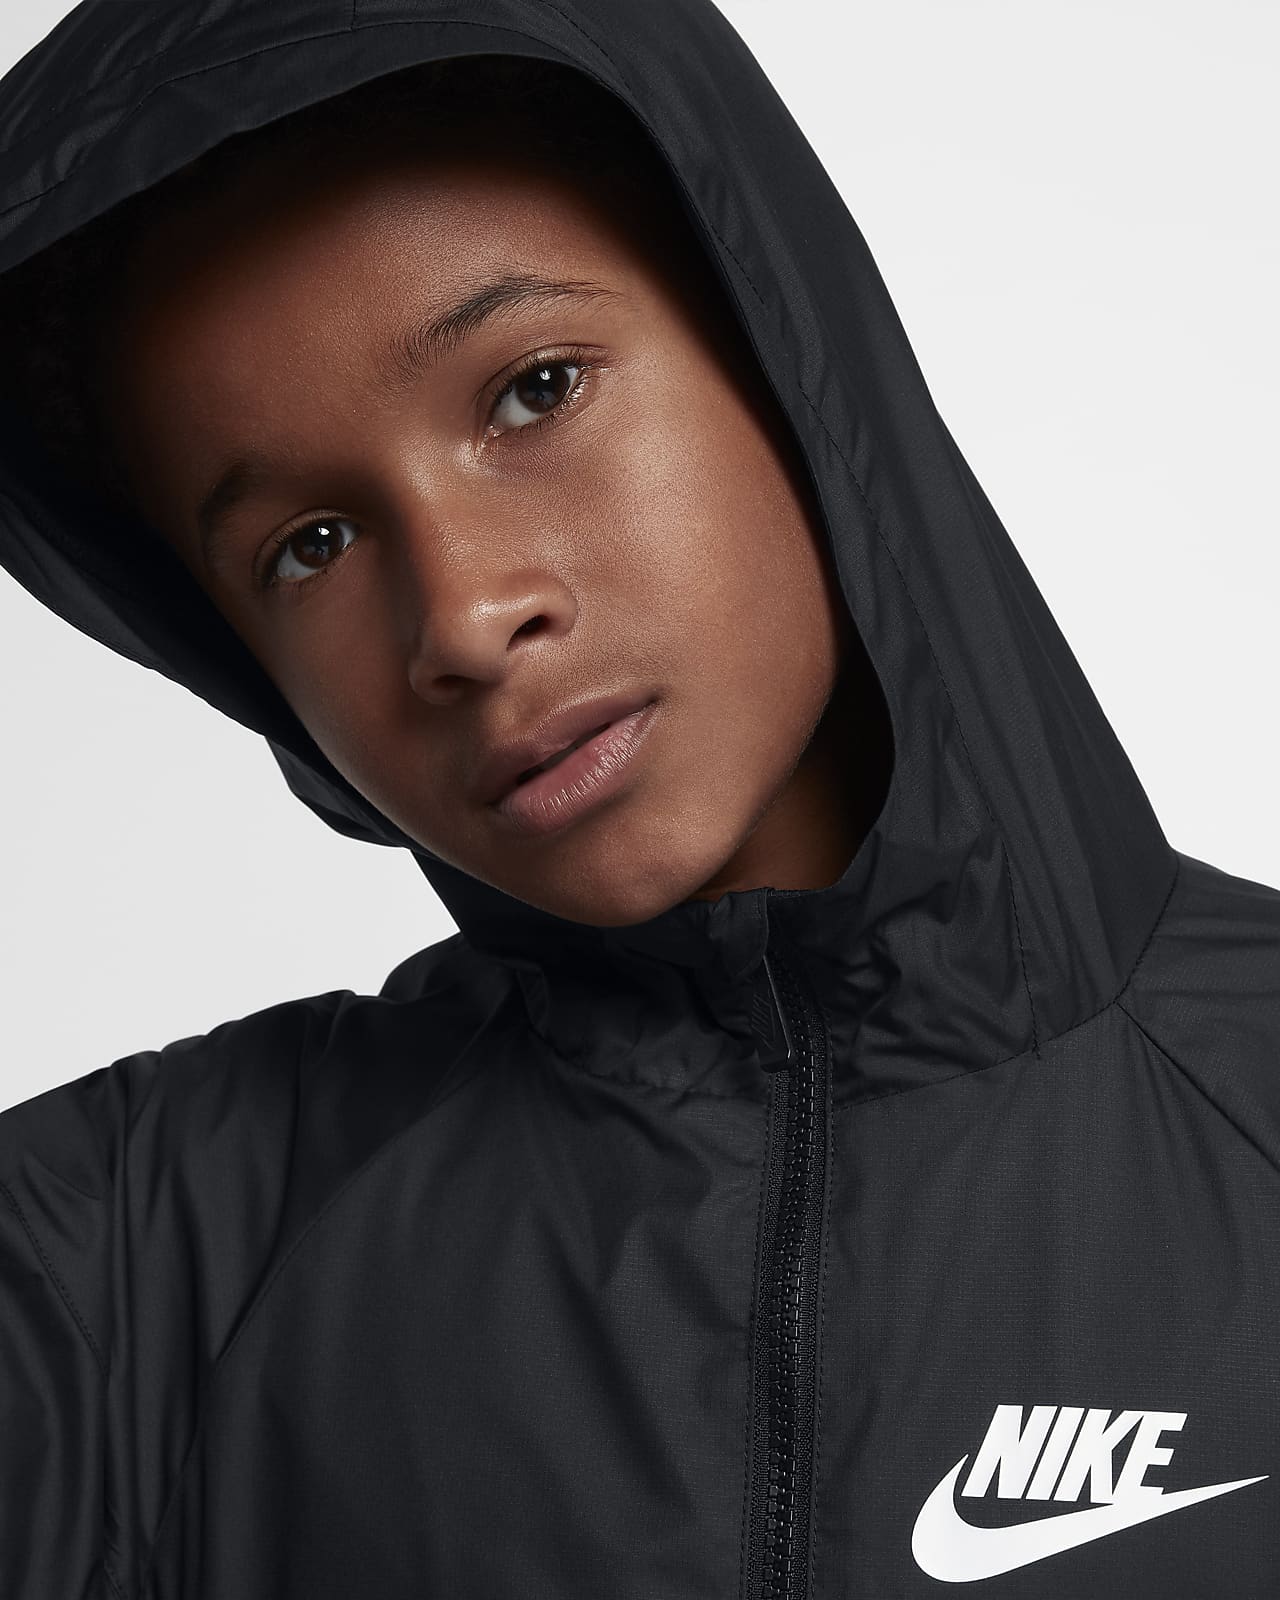 https://static.nike.com/a/images/t_PDP_1280_v1/f_auto,q_auto:eco/b9xdsylp88p0xqru3olb/sportswear-windrunner-older-loose-hip-length-hooded-jacket-6N3GSJ.png